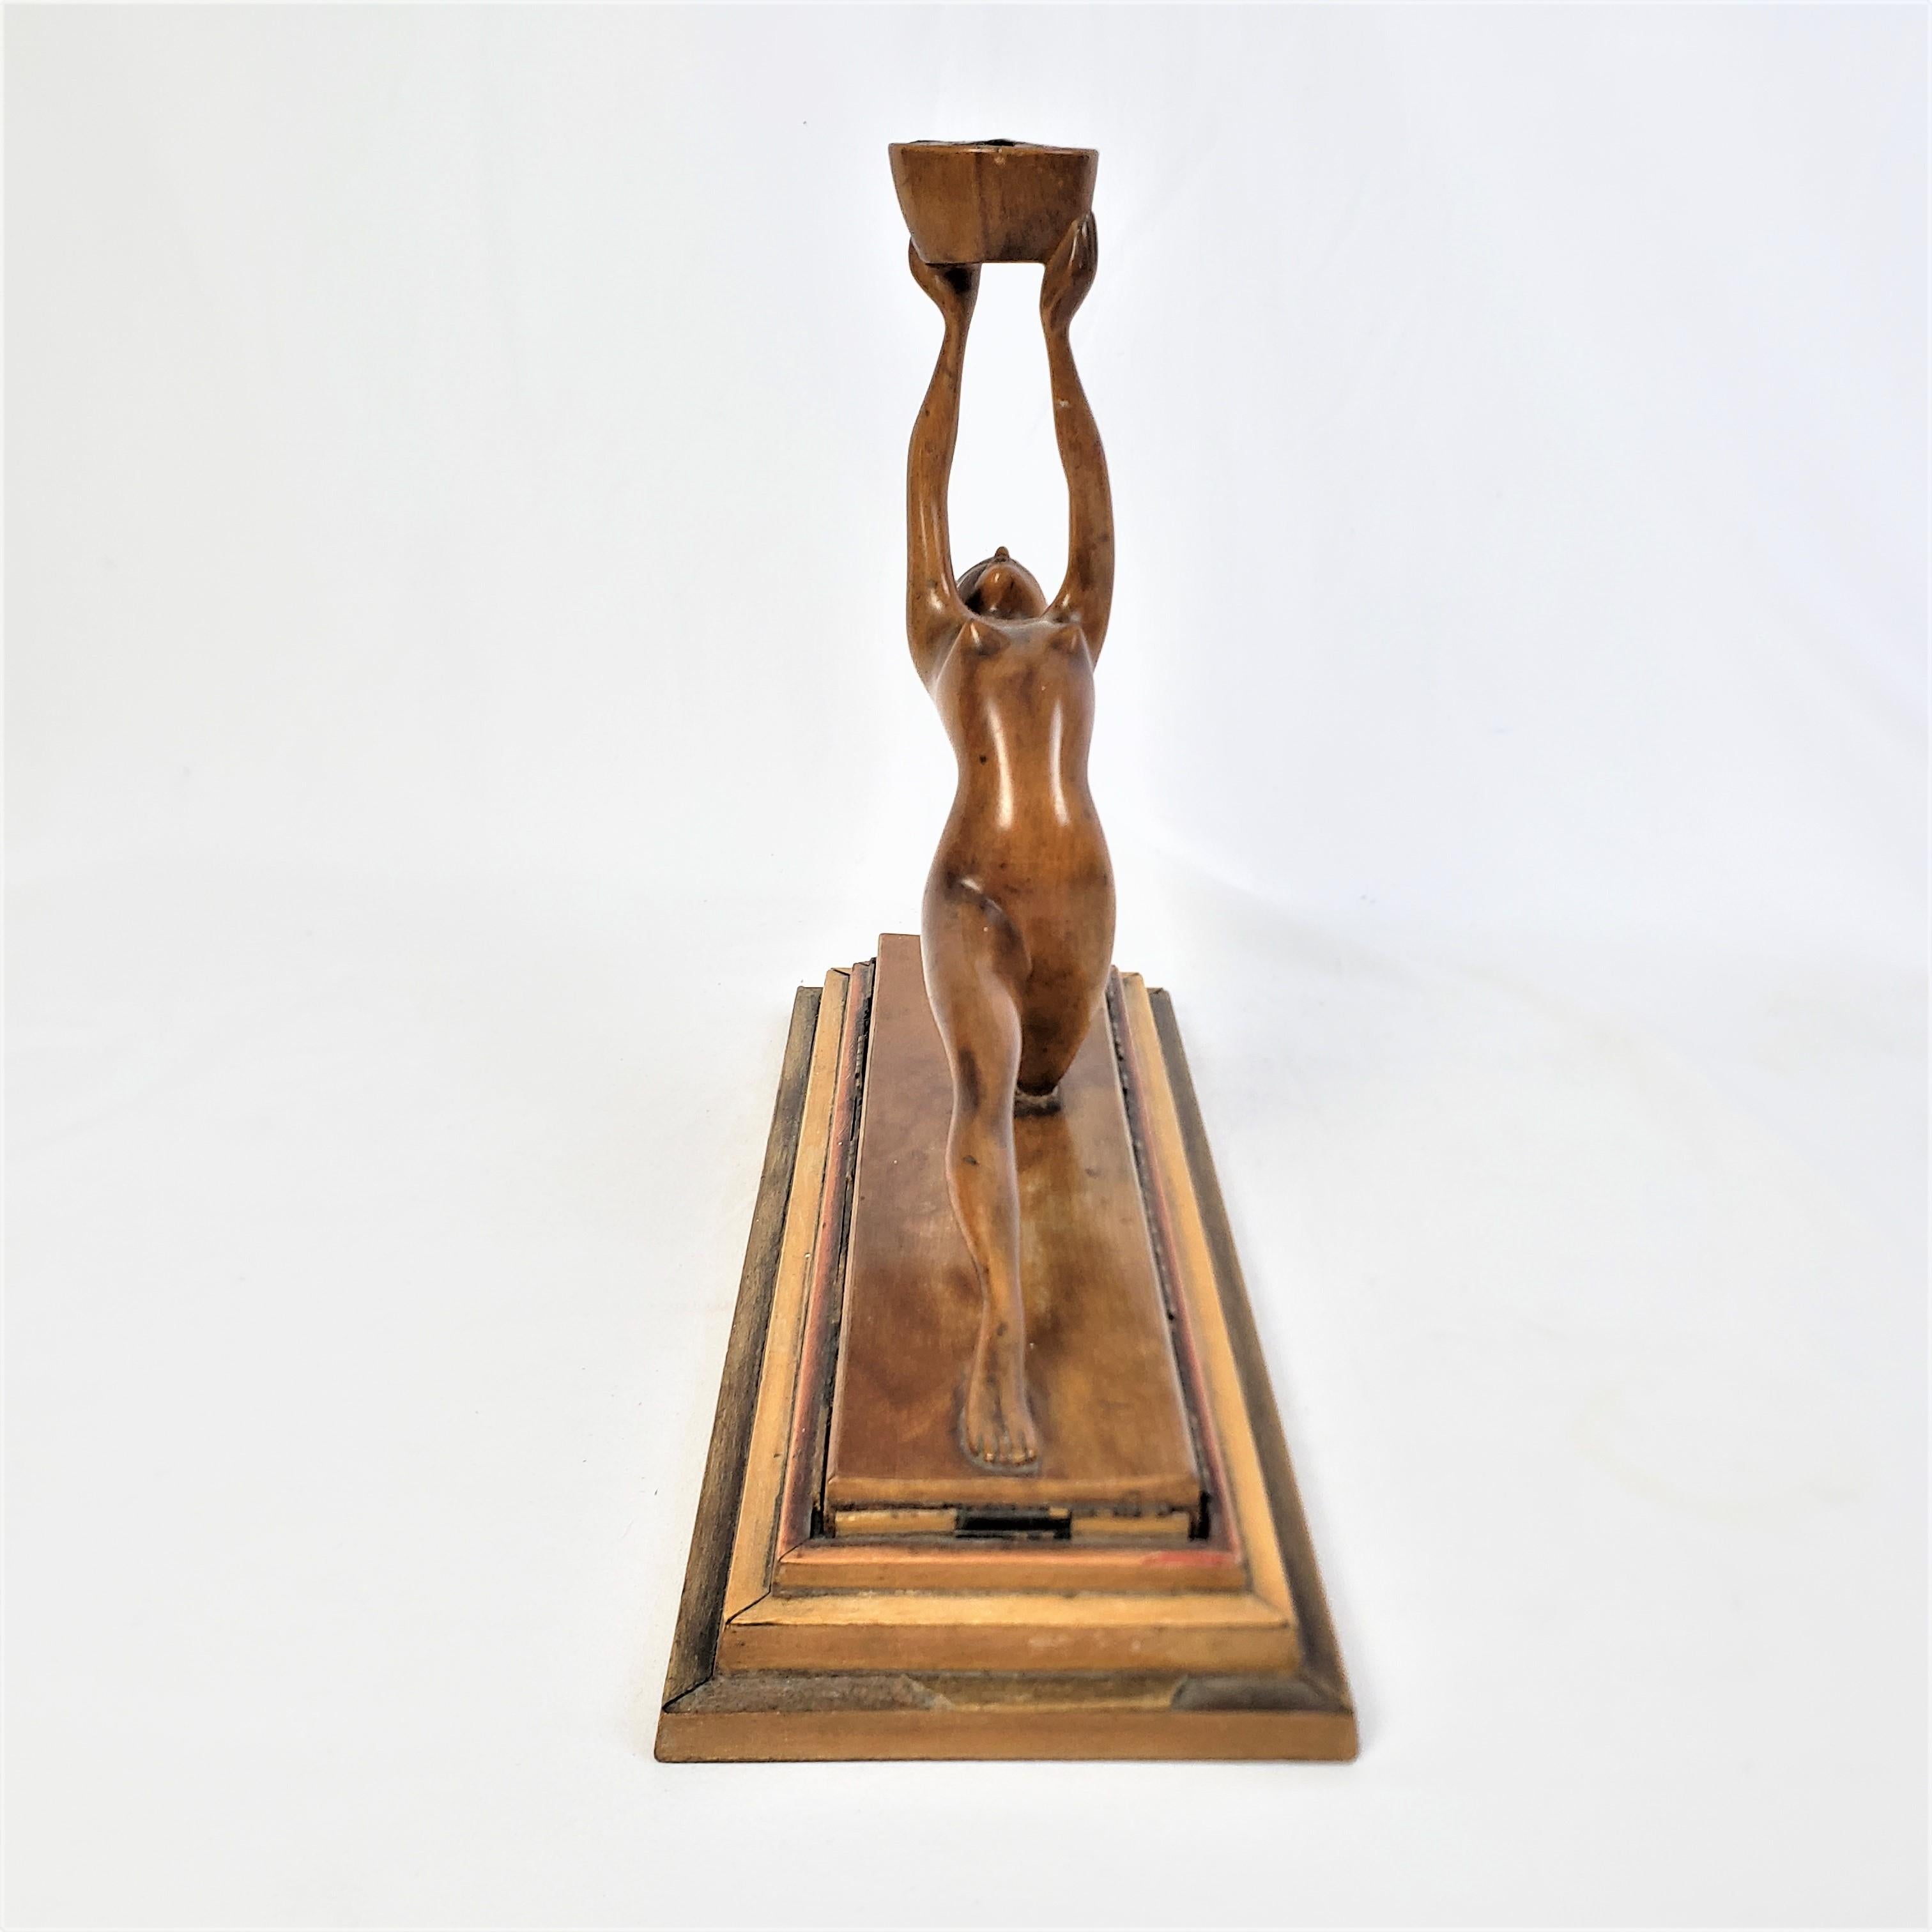 Antique Art Deco Hand-Carved Wooden Sculpture of a Nude Female Holding a Basket For Sale 2